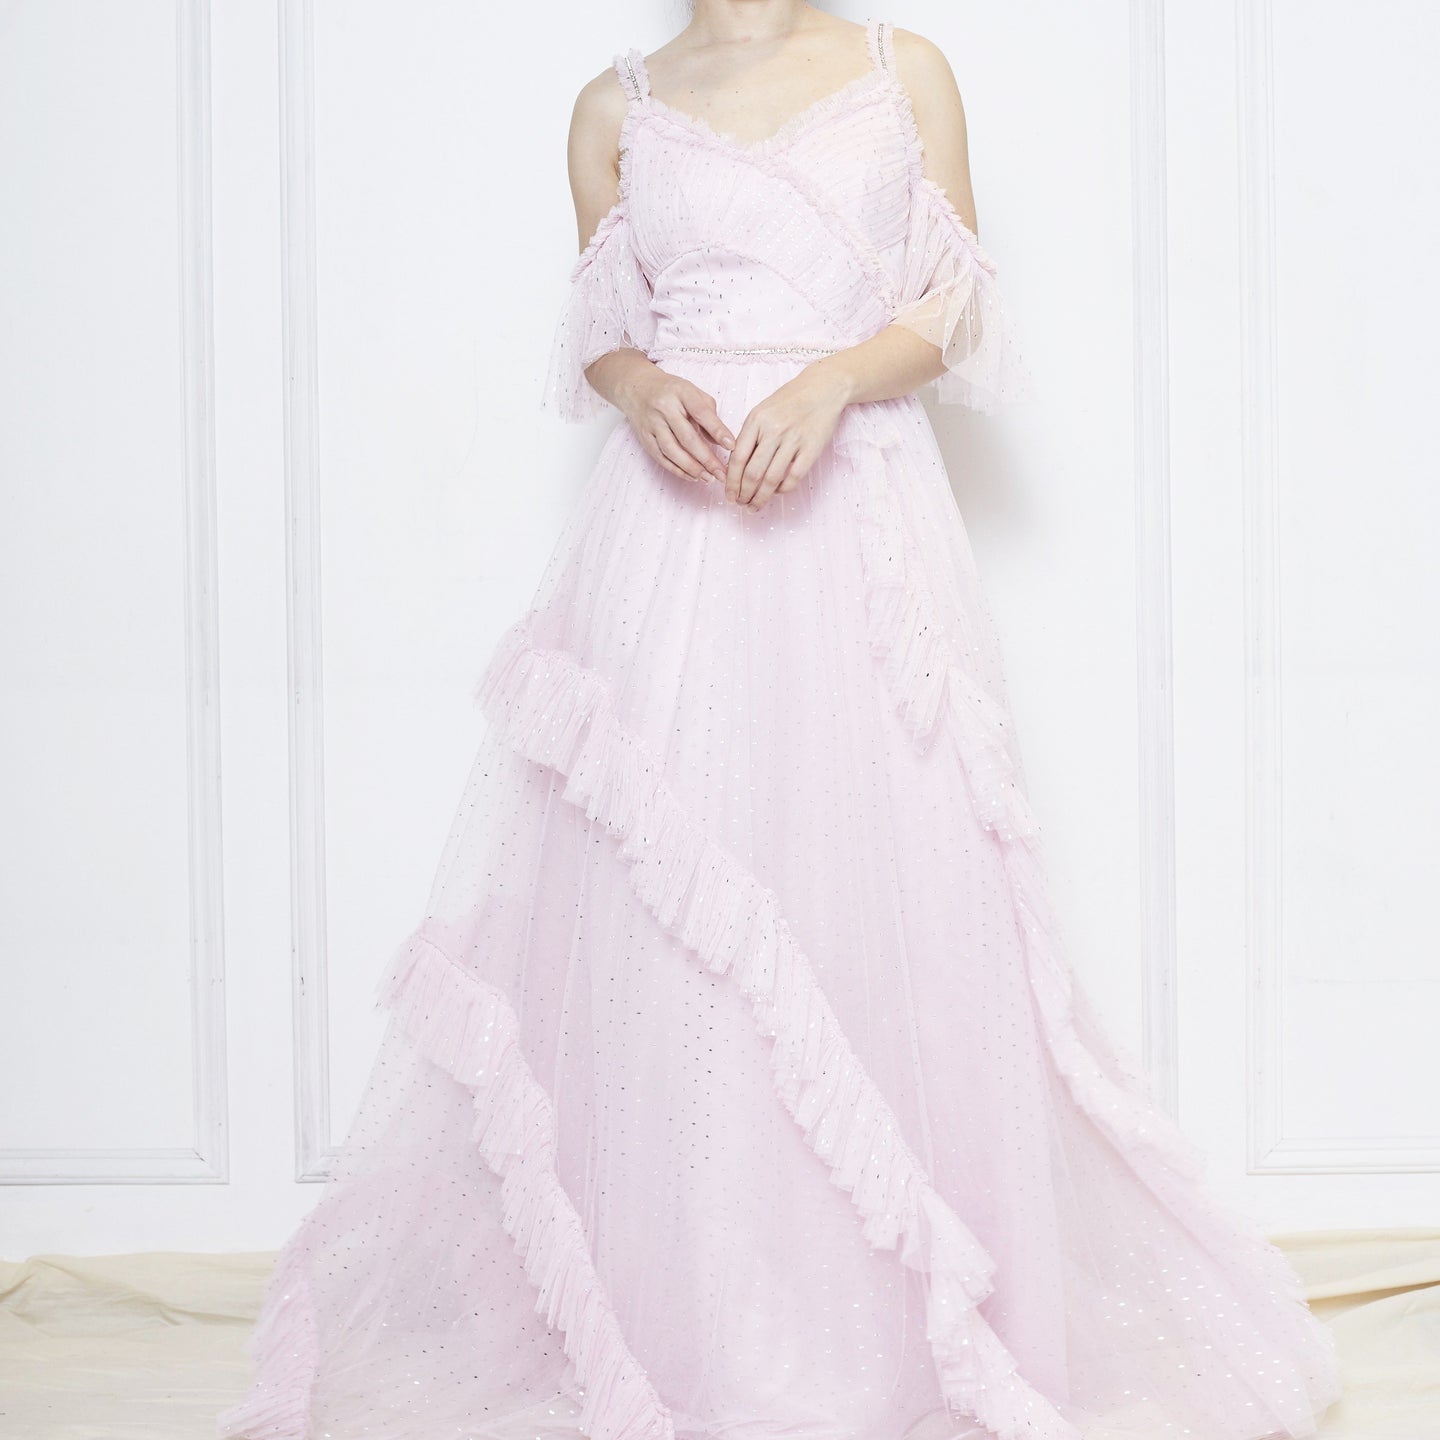 Kennedy Tulle Maxi Dress